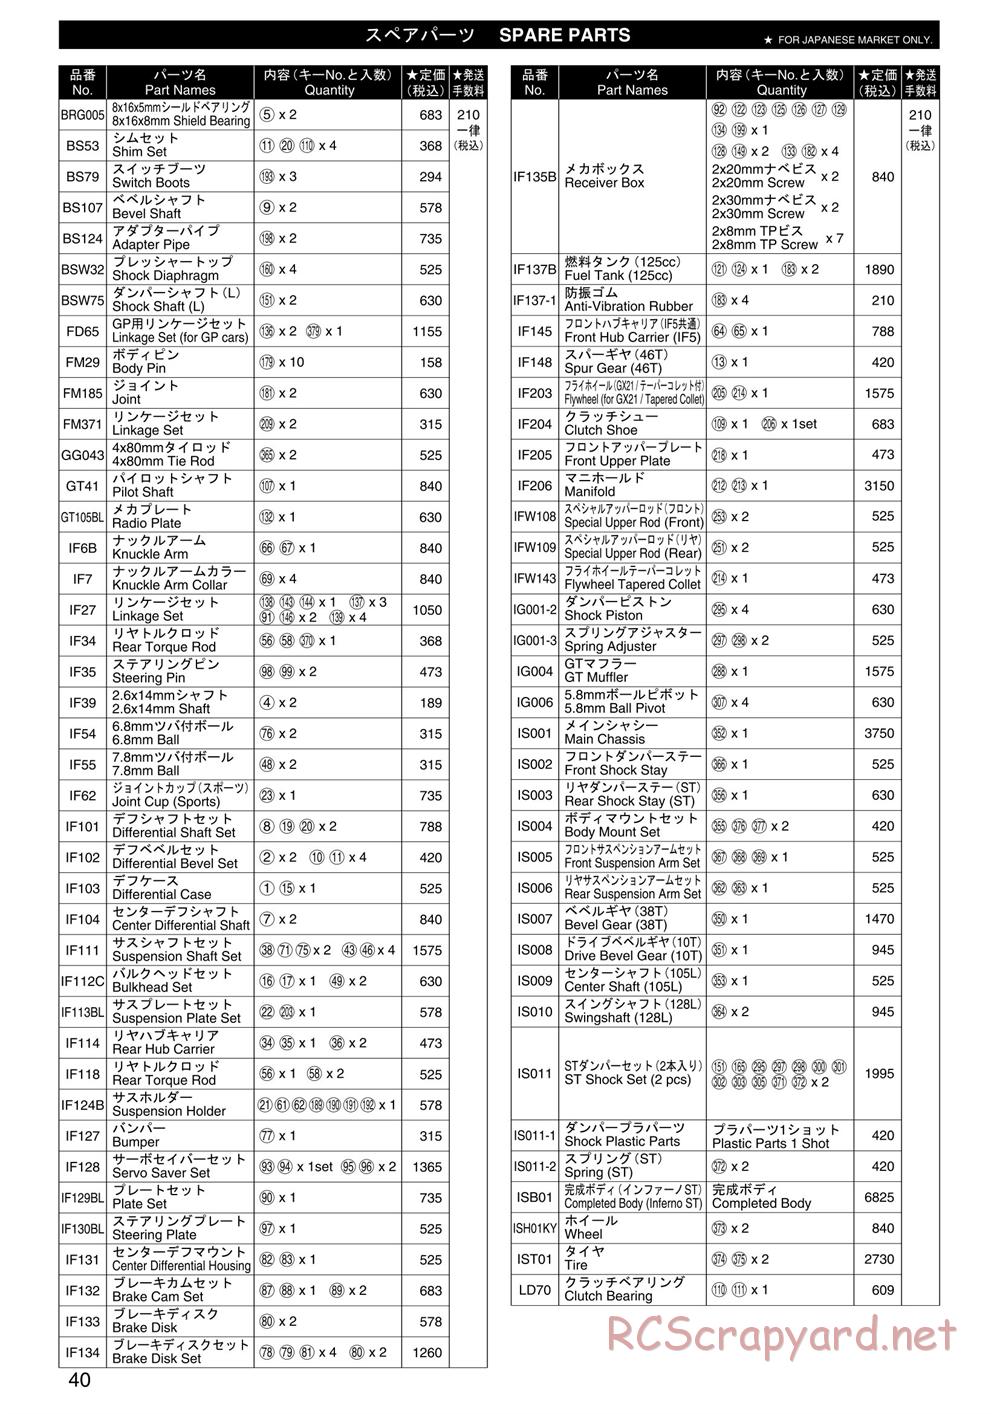 Kyosho - Inferno ST (2005) - Parts List - Page 1